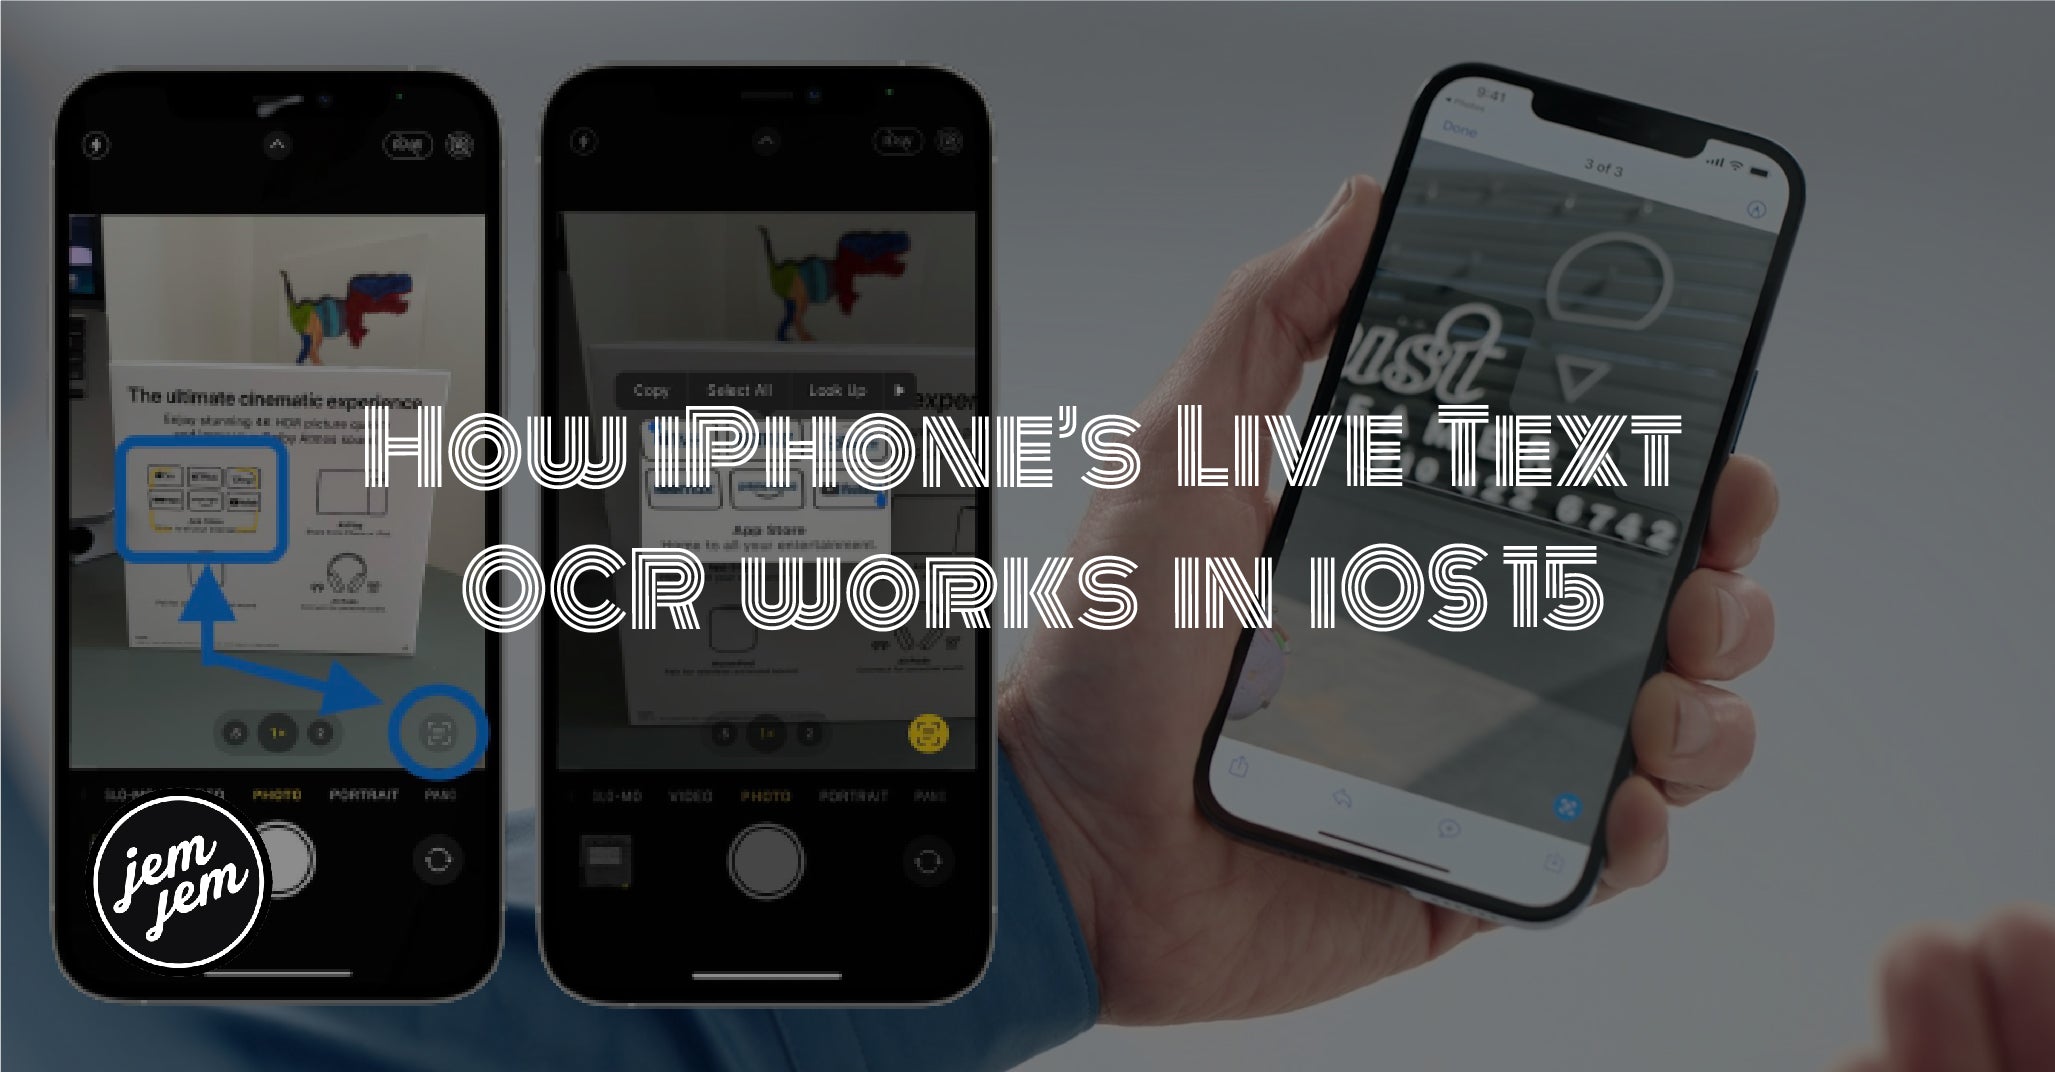 How iPhone’s Live Text OCR works in iOS 15